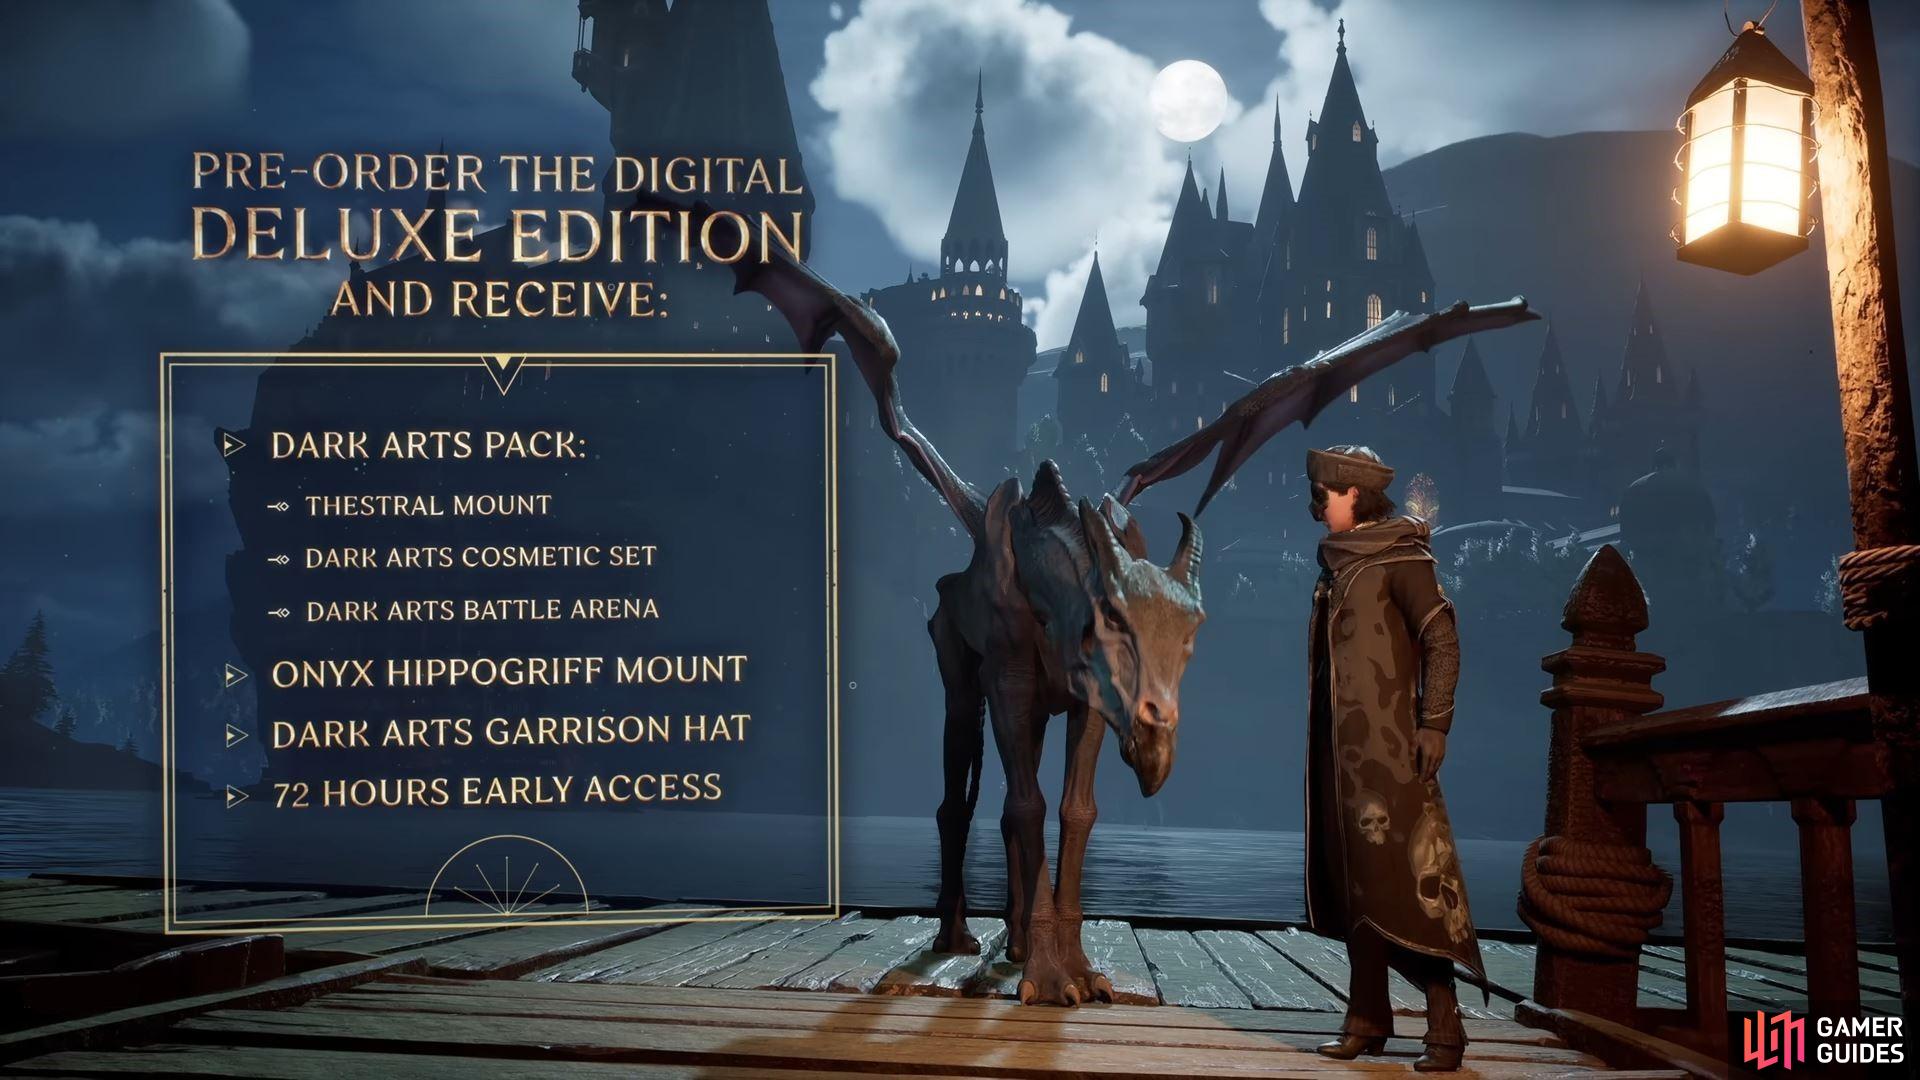 If you pre-order the Deluxe Edition, you’ll get the Dark Arts pack and an extra Onyx Hippogriff Mount (which is also available to players who pre-order the standard edition). (Credit: Hogwarts Legacy Showcase).